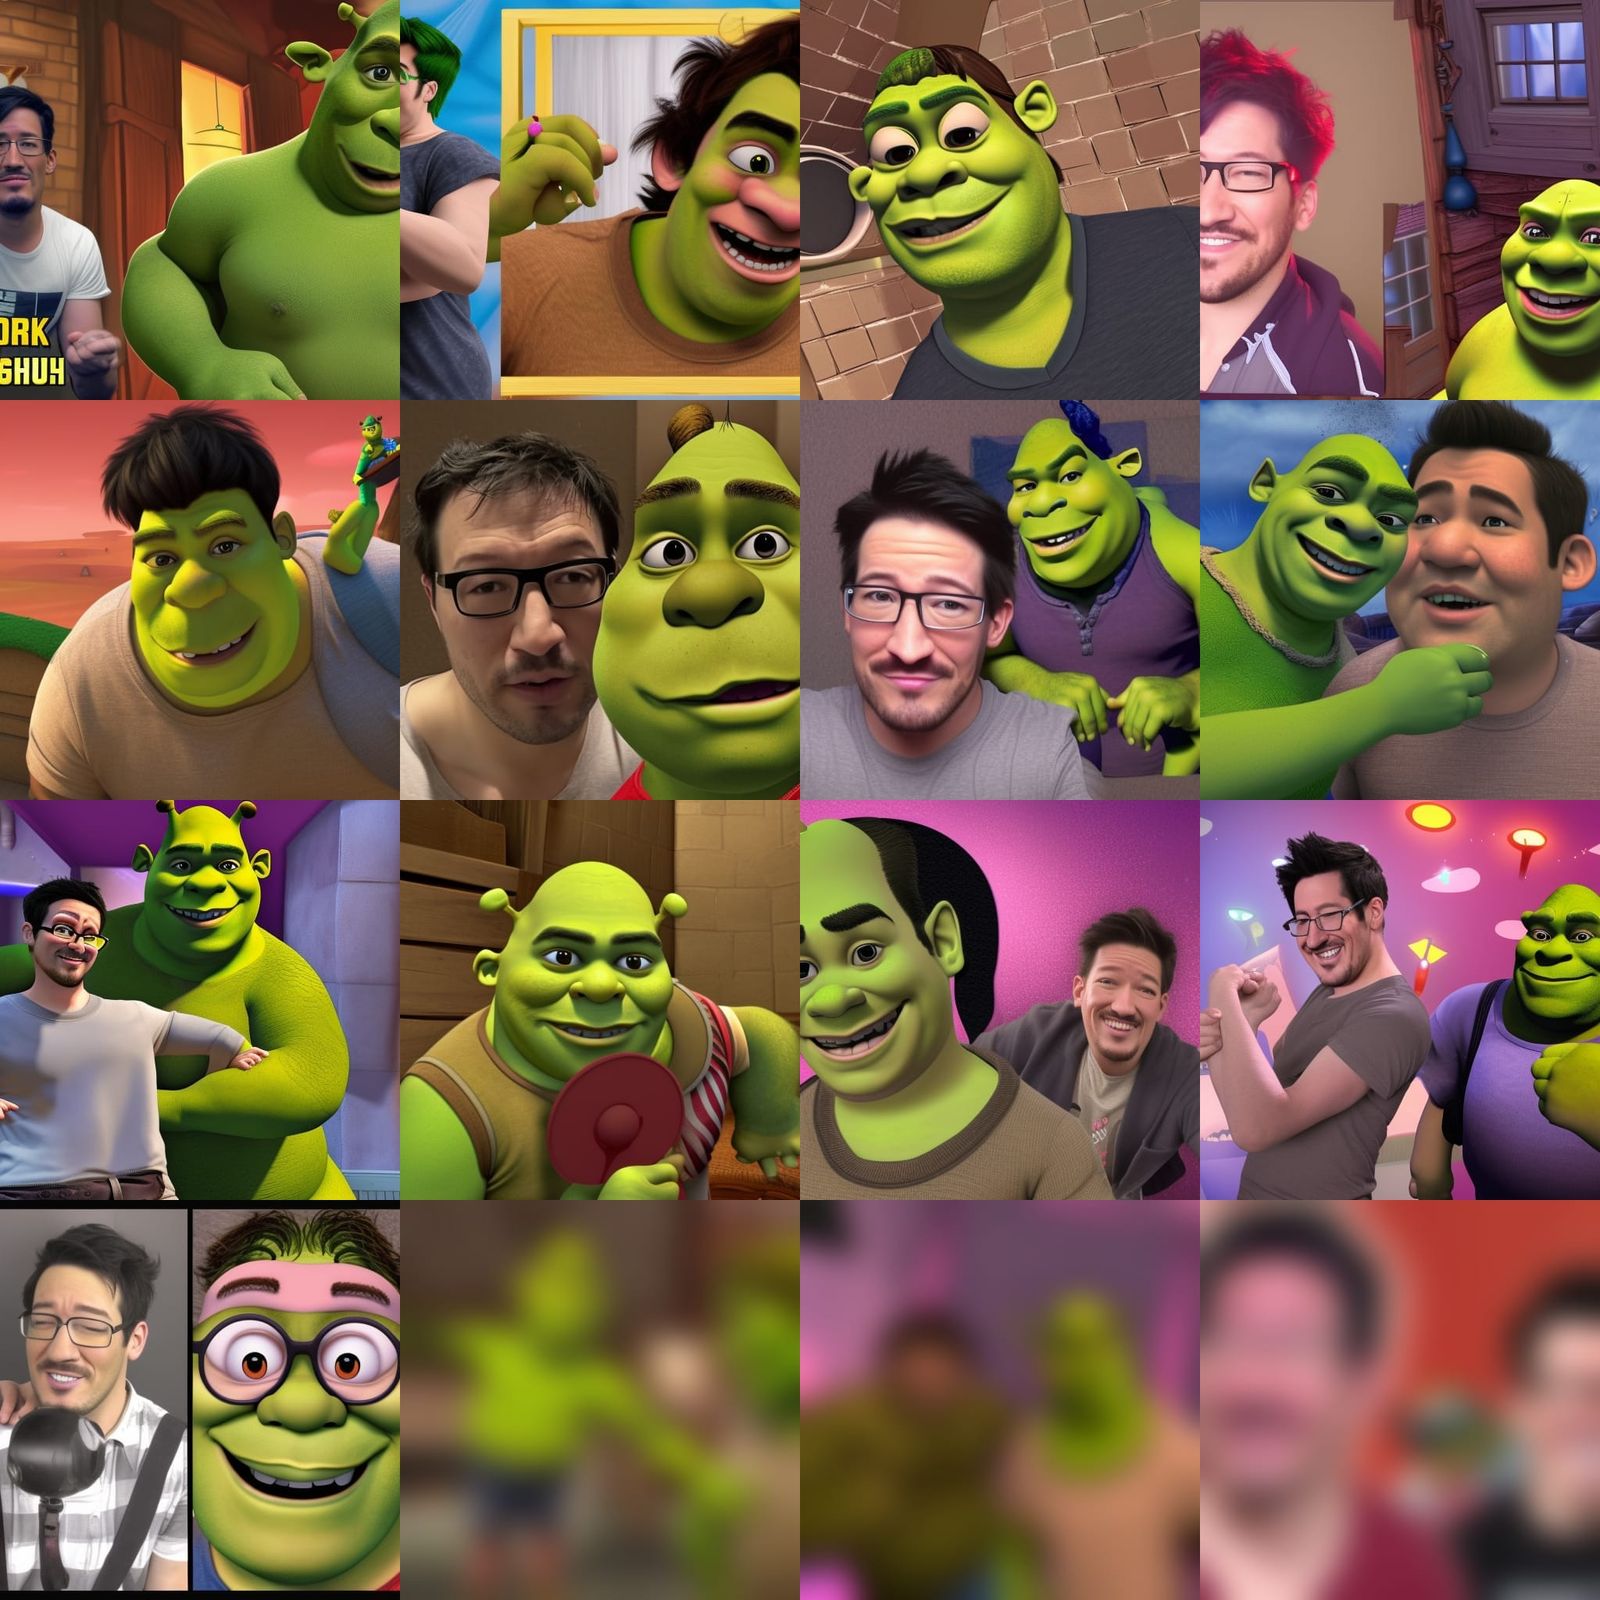 A collage of photos of two men photoshopped into various scenes with Shrek. - Shrek